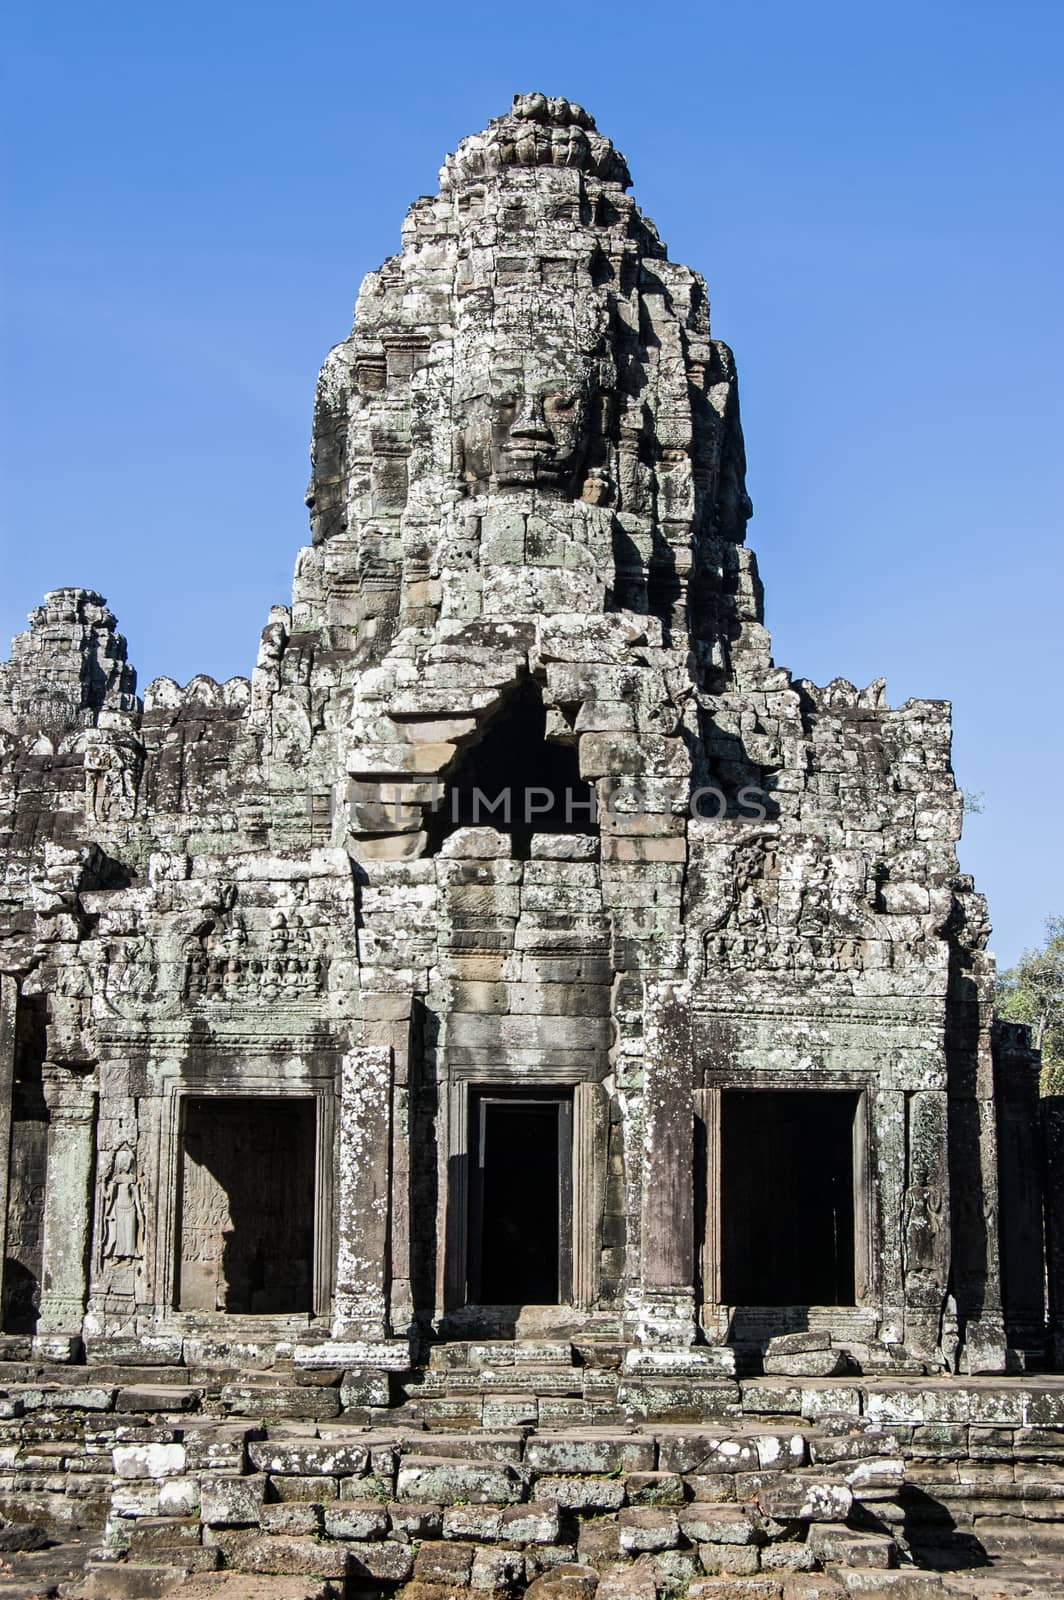 Part of the magnificent Bayon Temple at Angkor Thom, Cambodia. Detail shows one of the towers topped with a carved face.